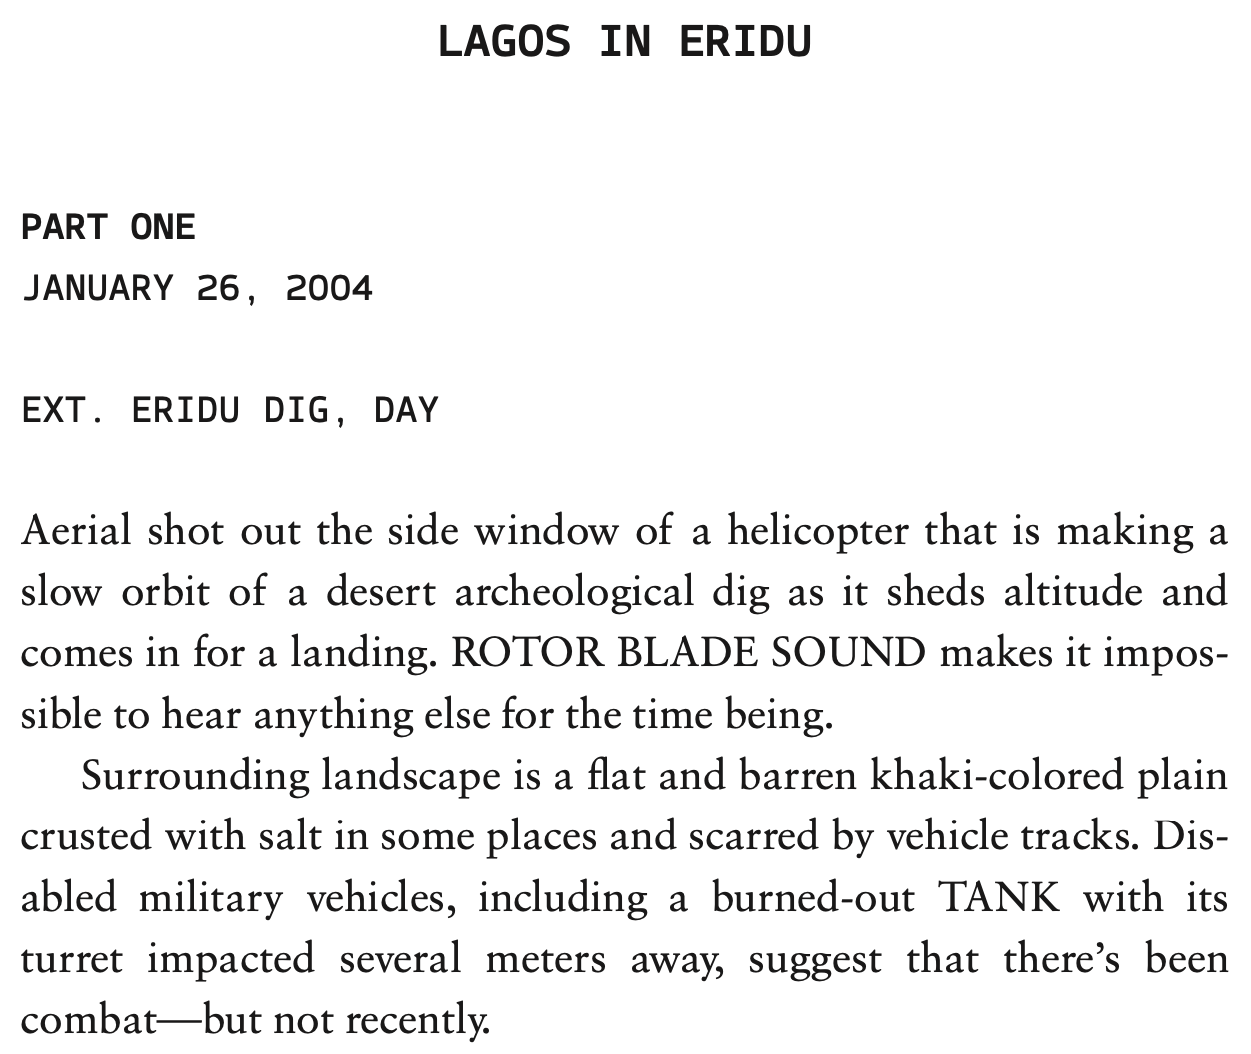 Excerpt from a screenplay. LAGOS IN ERIDU, PART ONE. JANUARY 26, 2004. EXT. ERIDU DIG, DAY. Aerial shot out the side window of a helicopter that is making a slow orbit of a desert archeological dig as it sheds altitude and comes in for a landing. ROTOR BLADE SOUND makes it impossible to hear anything else for the time being. Surrounding landscape is a flat and barren khaki-colored plain crusted with salt in some places and scarred by vehicle tracks. Disabled military vehicles, including a burned-out TANK with its turret impacted several meters away, suggest that there's been combat--but not recently.